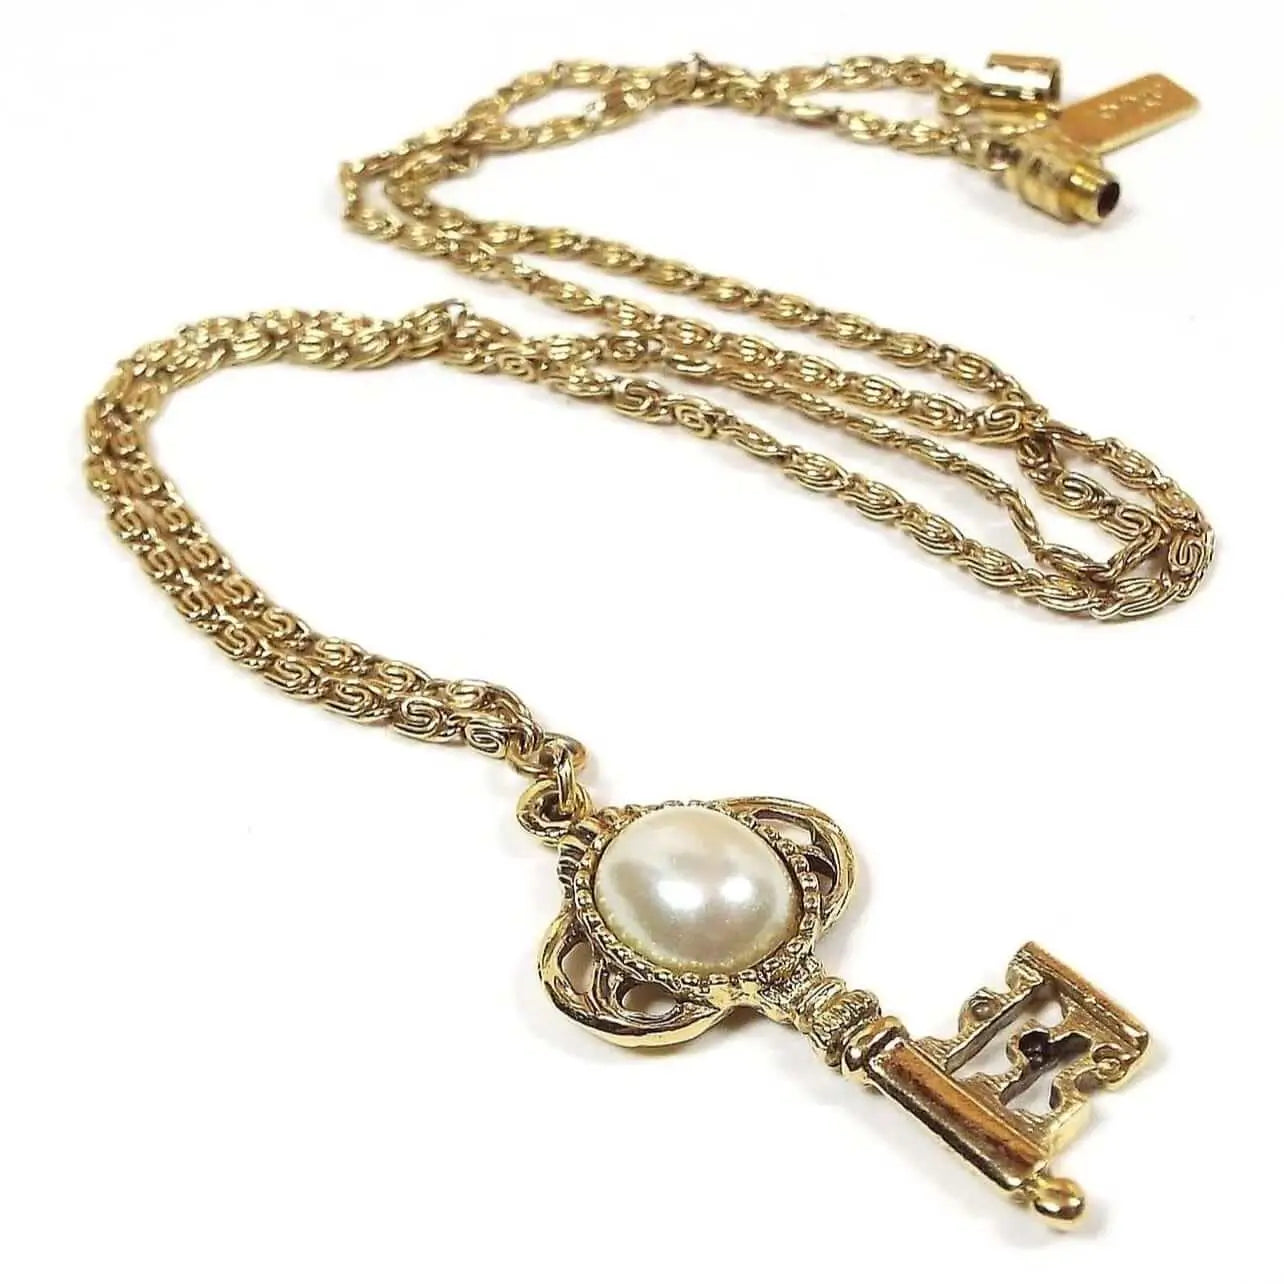 Chain is gold in color with snail links that look like the letter S. It has an oval barrel screw on clasp. The pendant is gold color old style skeleton key with rounded oval pearly off white plastic at the top. There is a rectangle tag that is stamped 1928 on it.